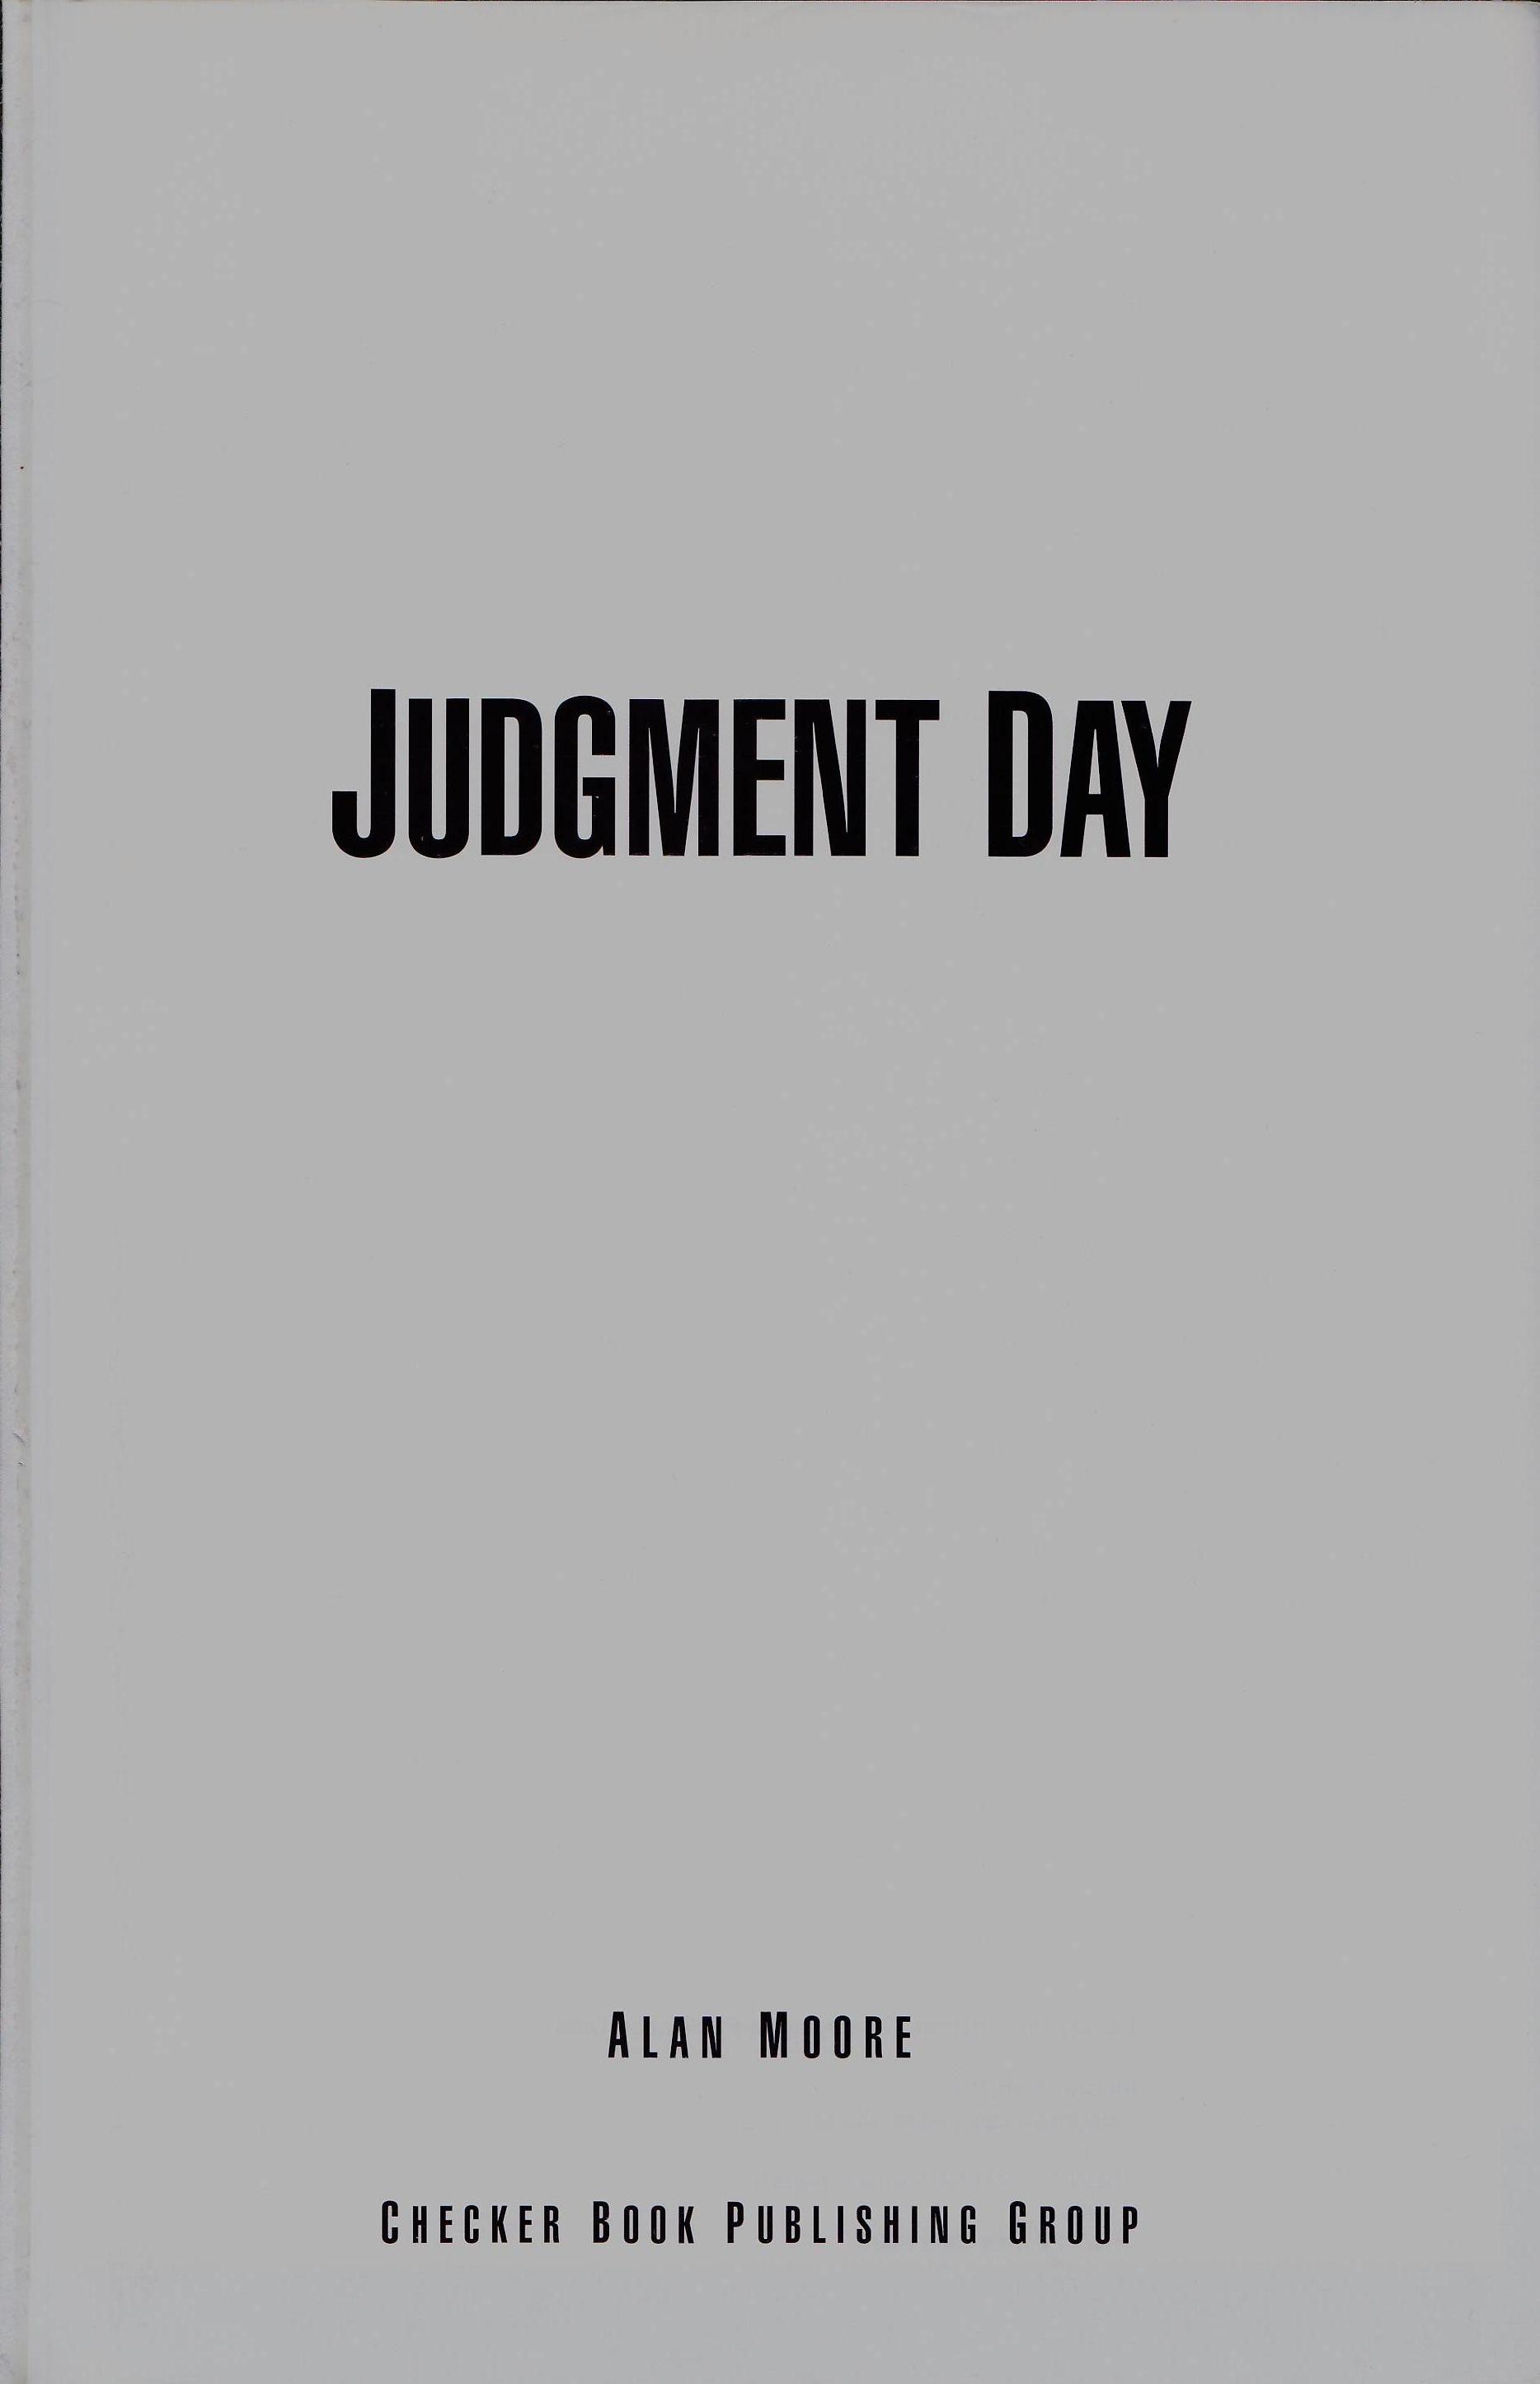 Read online Judgment Day comic -  Issue # TPB - 4